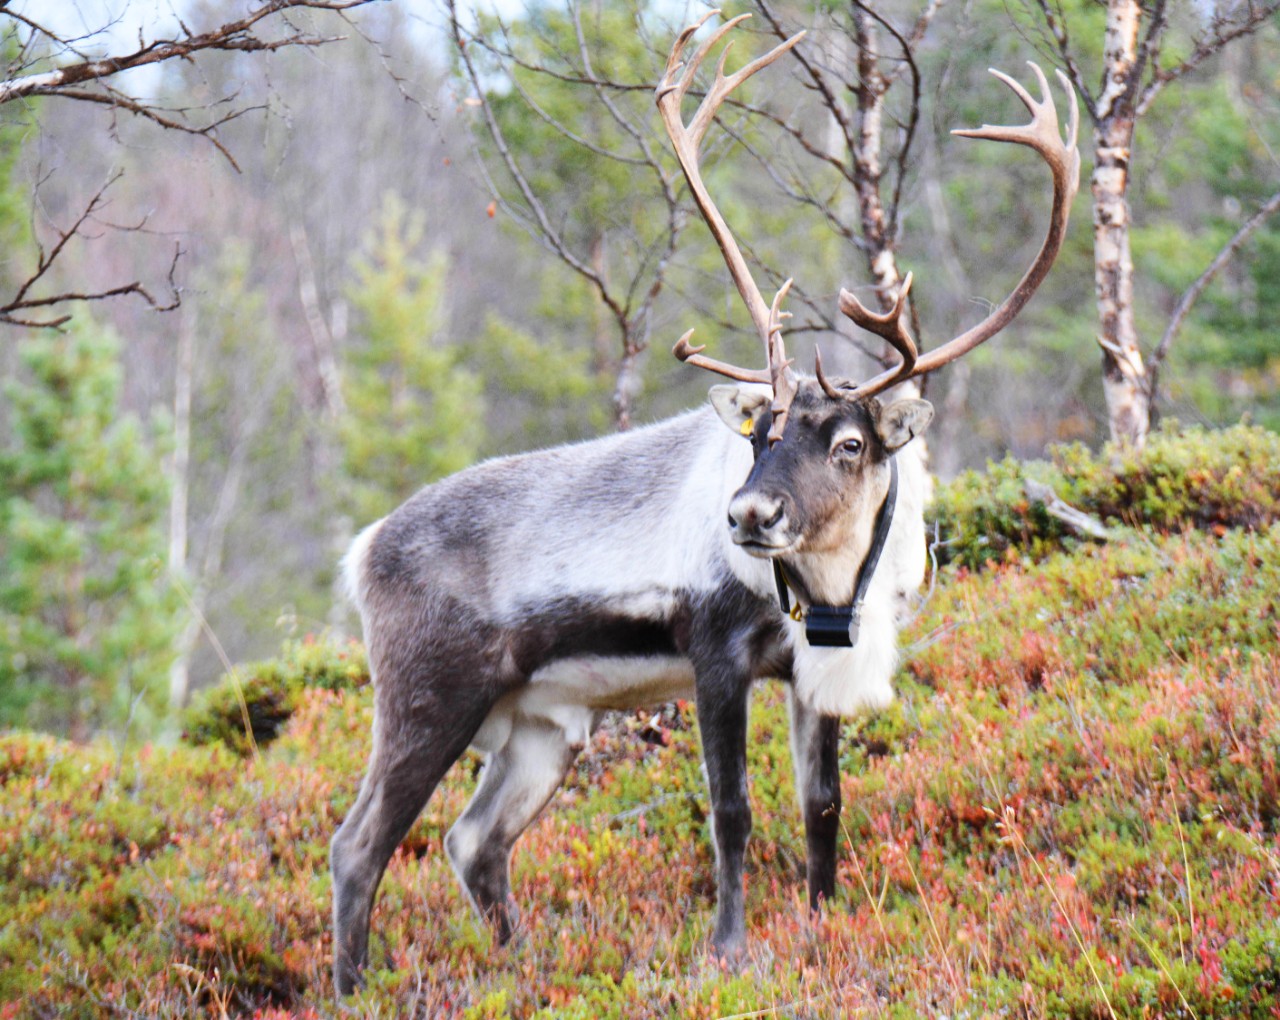 STEM SIGHTS: The Concordia prof who studies mating systems among reindeer and caribou